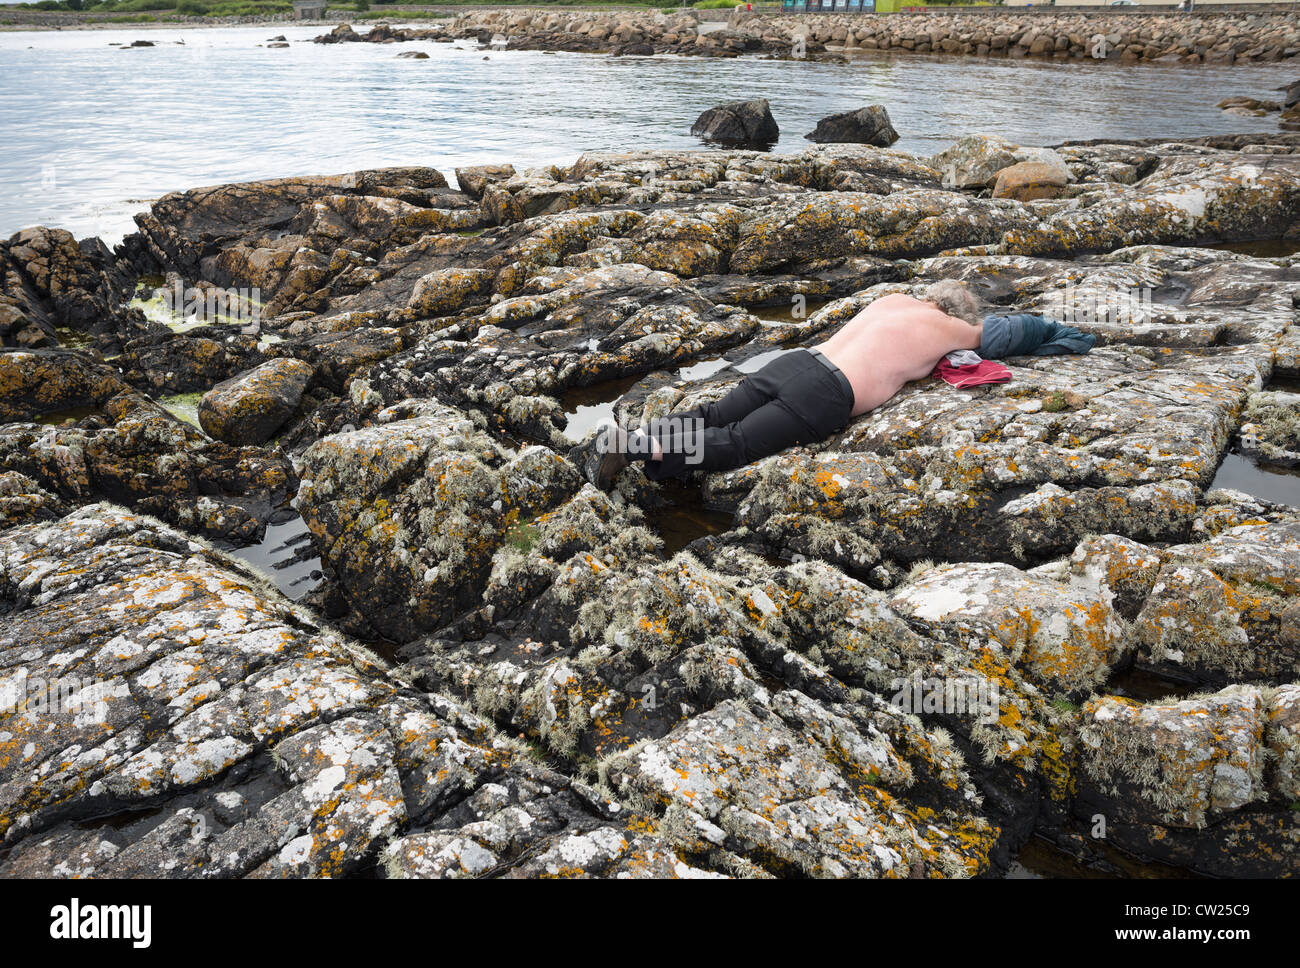 An old man taking in the sun on county Galway's south coast. Republic of Ireland. Stock Photo